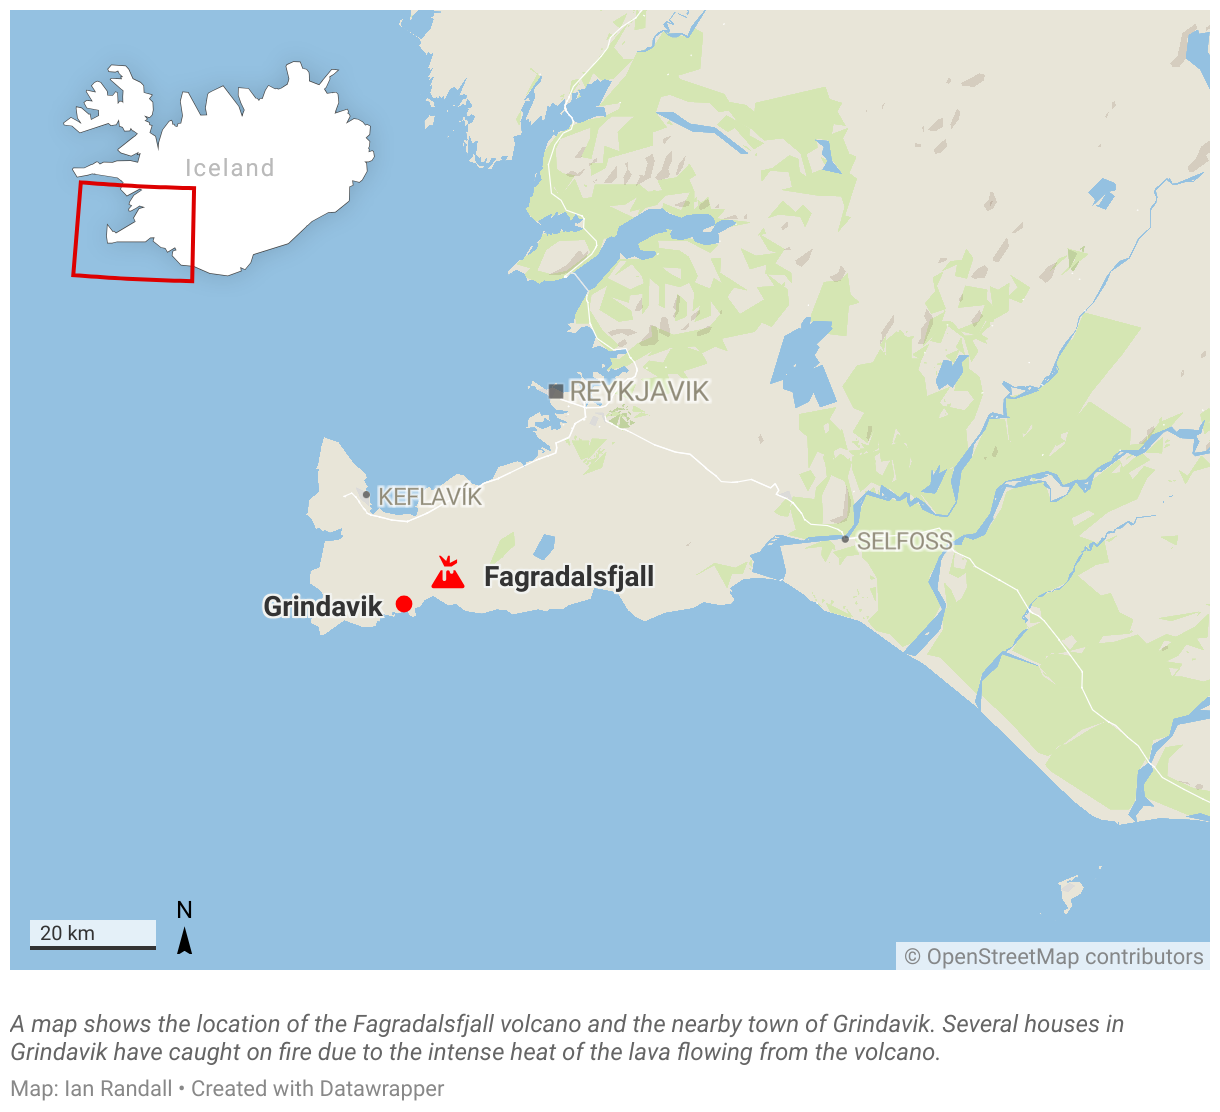 A map shows the location of the Fagradalsfjall volcano and the nearby town of Grindavik.